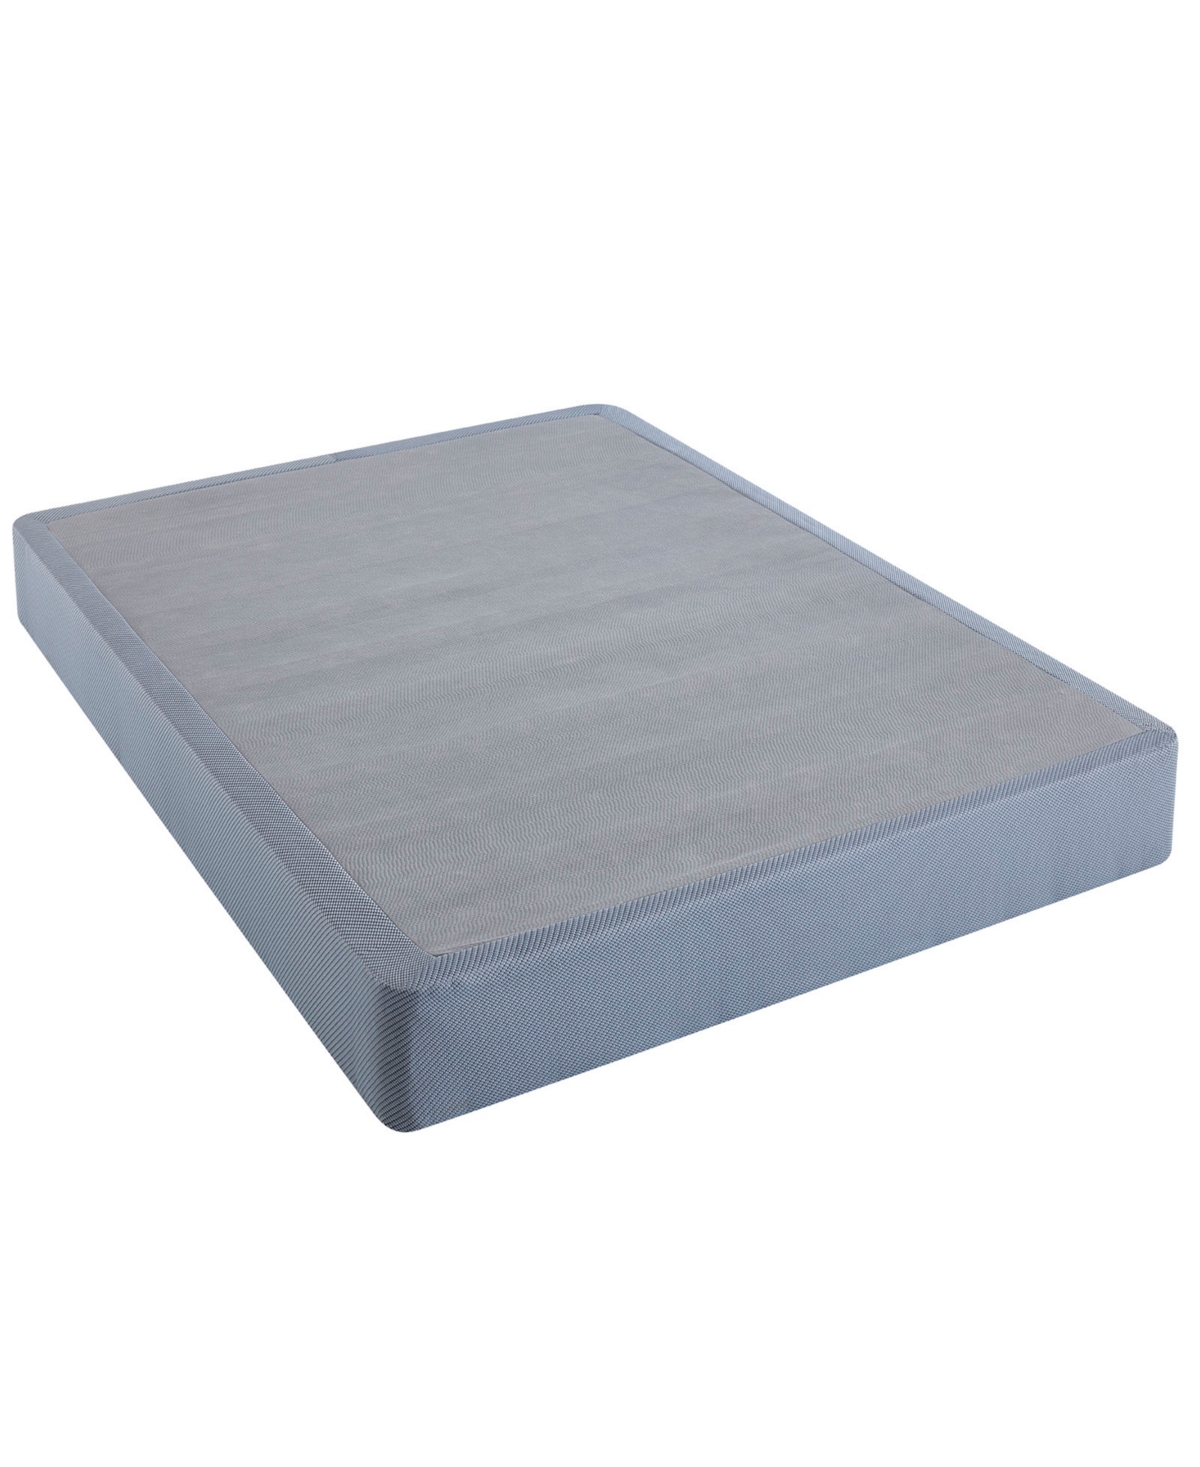 Low Profile 5" Box Spring- Twin Xl, Created for Macy's